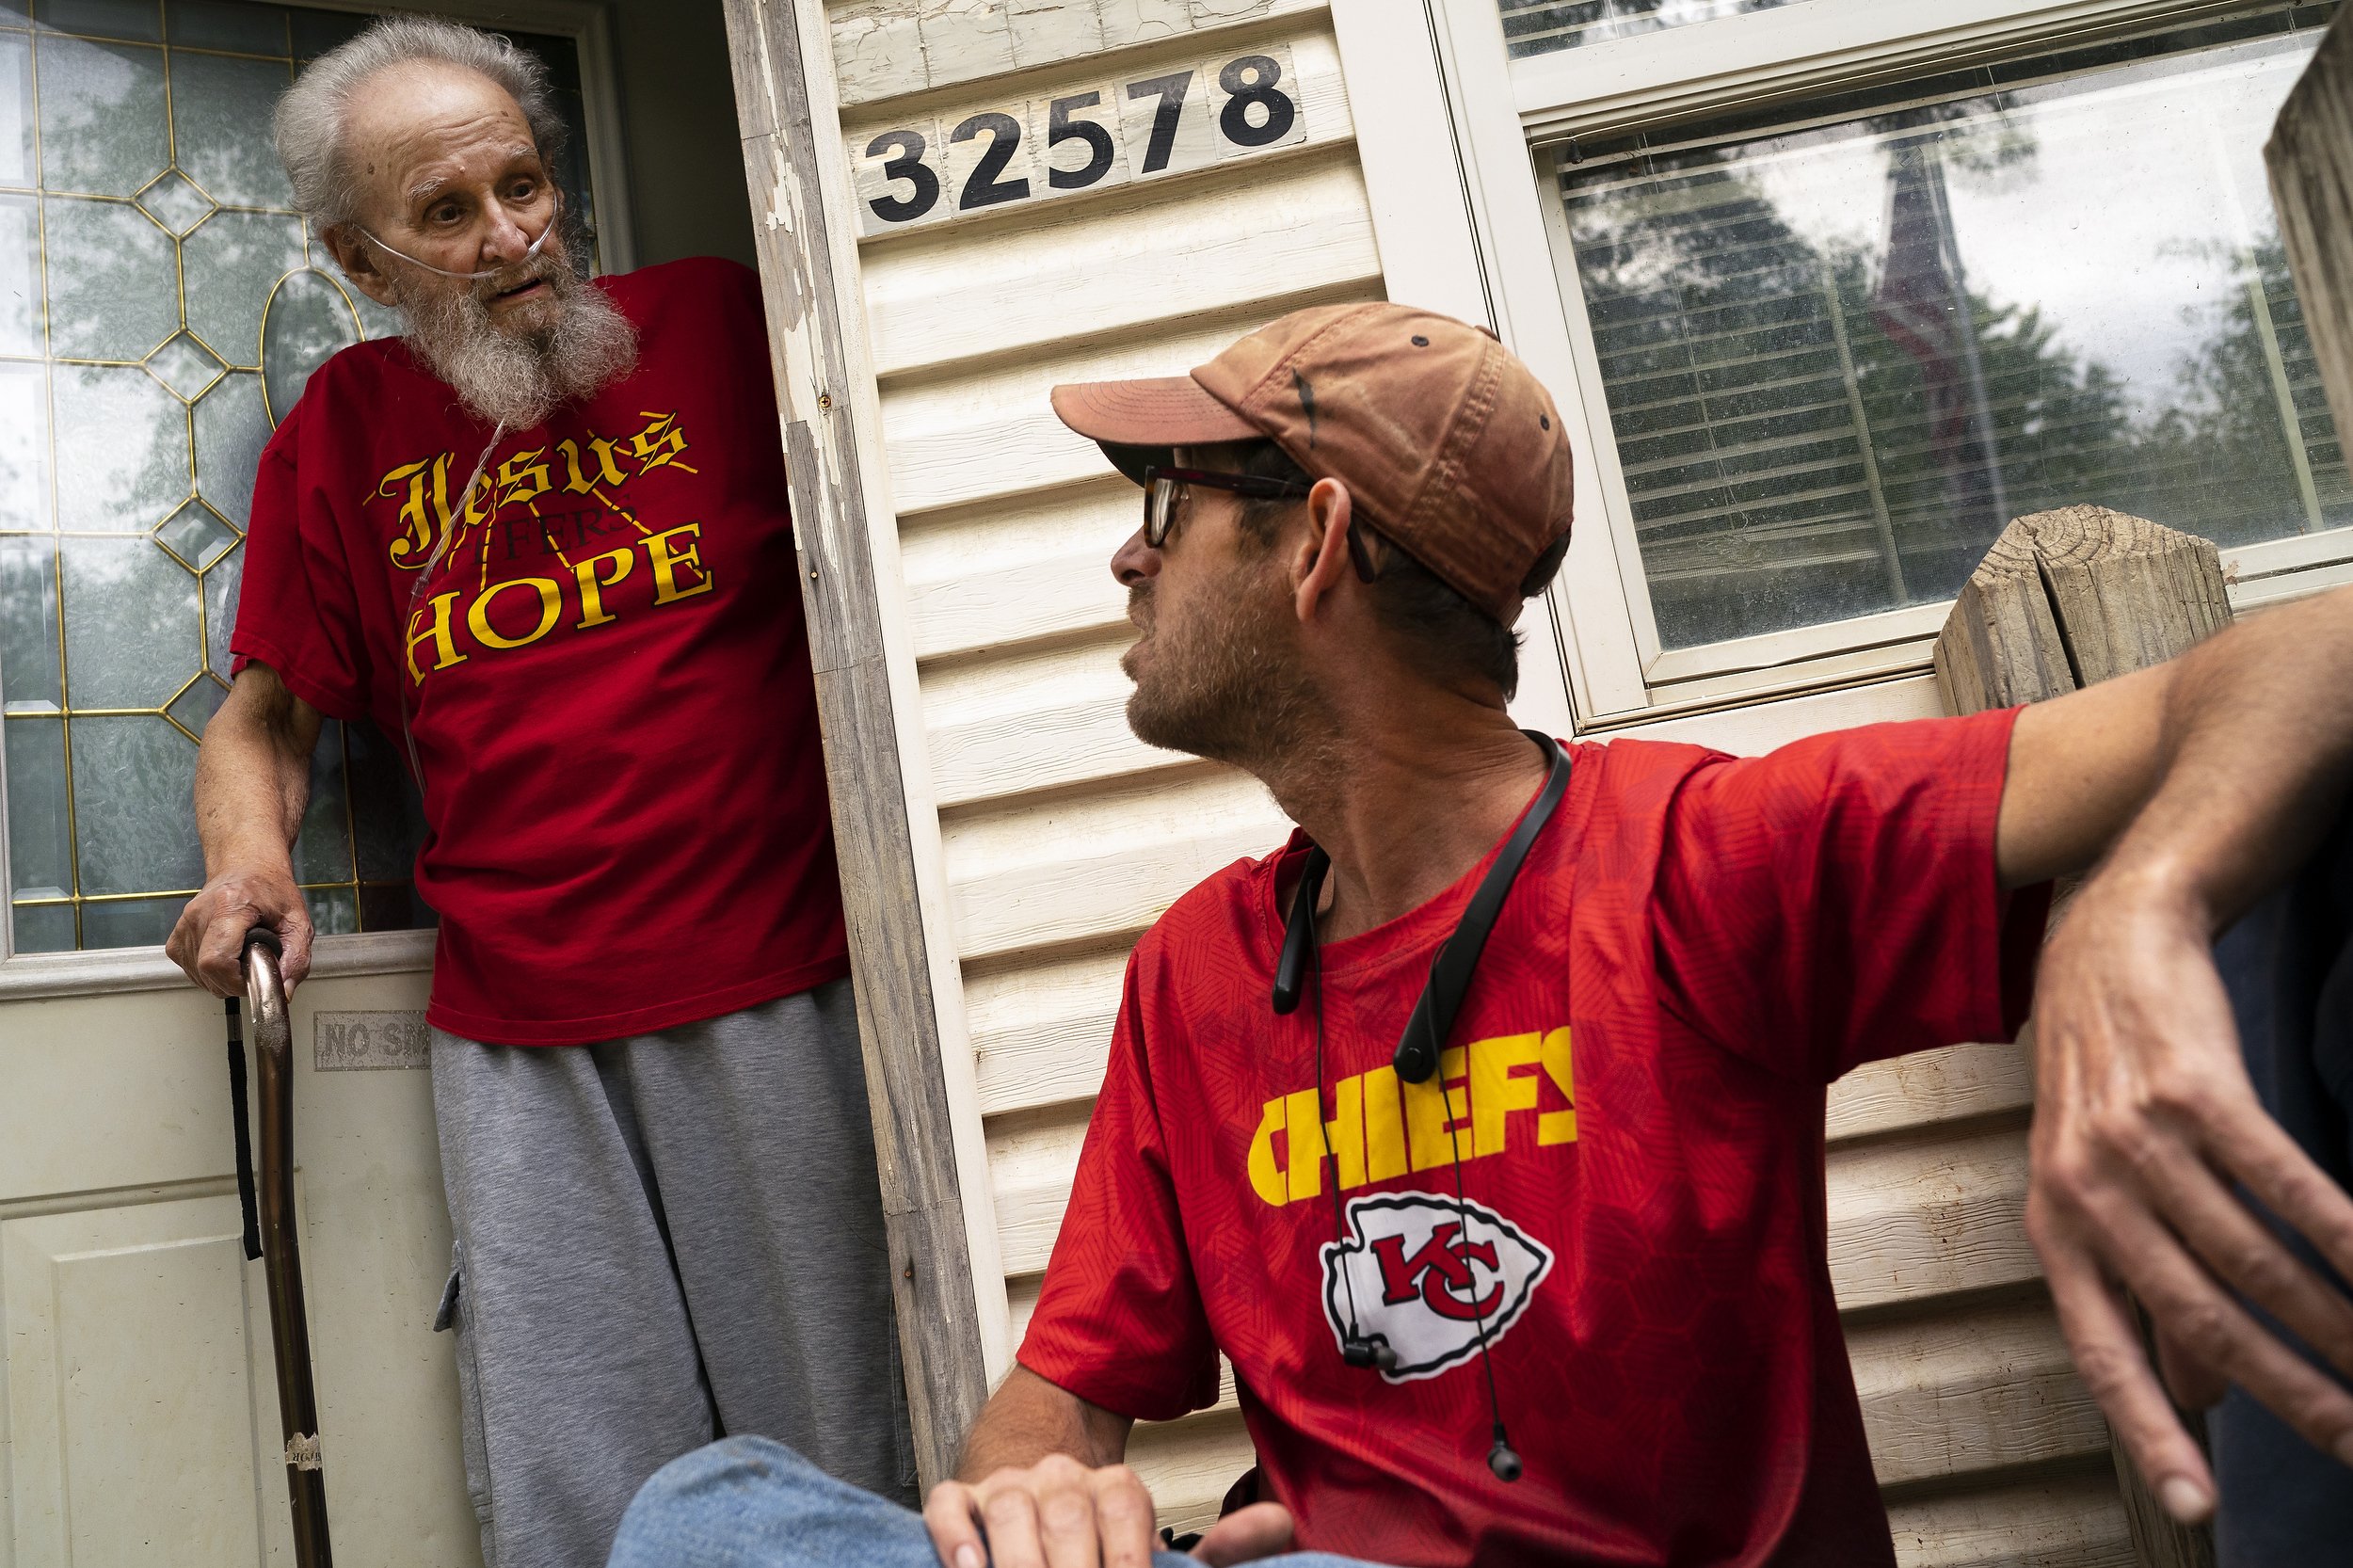  Daryel Miller, 80, left, emerges from his home to speak with his son Daryel Franklin Miller, 50, on Tuesday, September 20, 2022, in Excelsior Springs, Mo.  